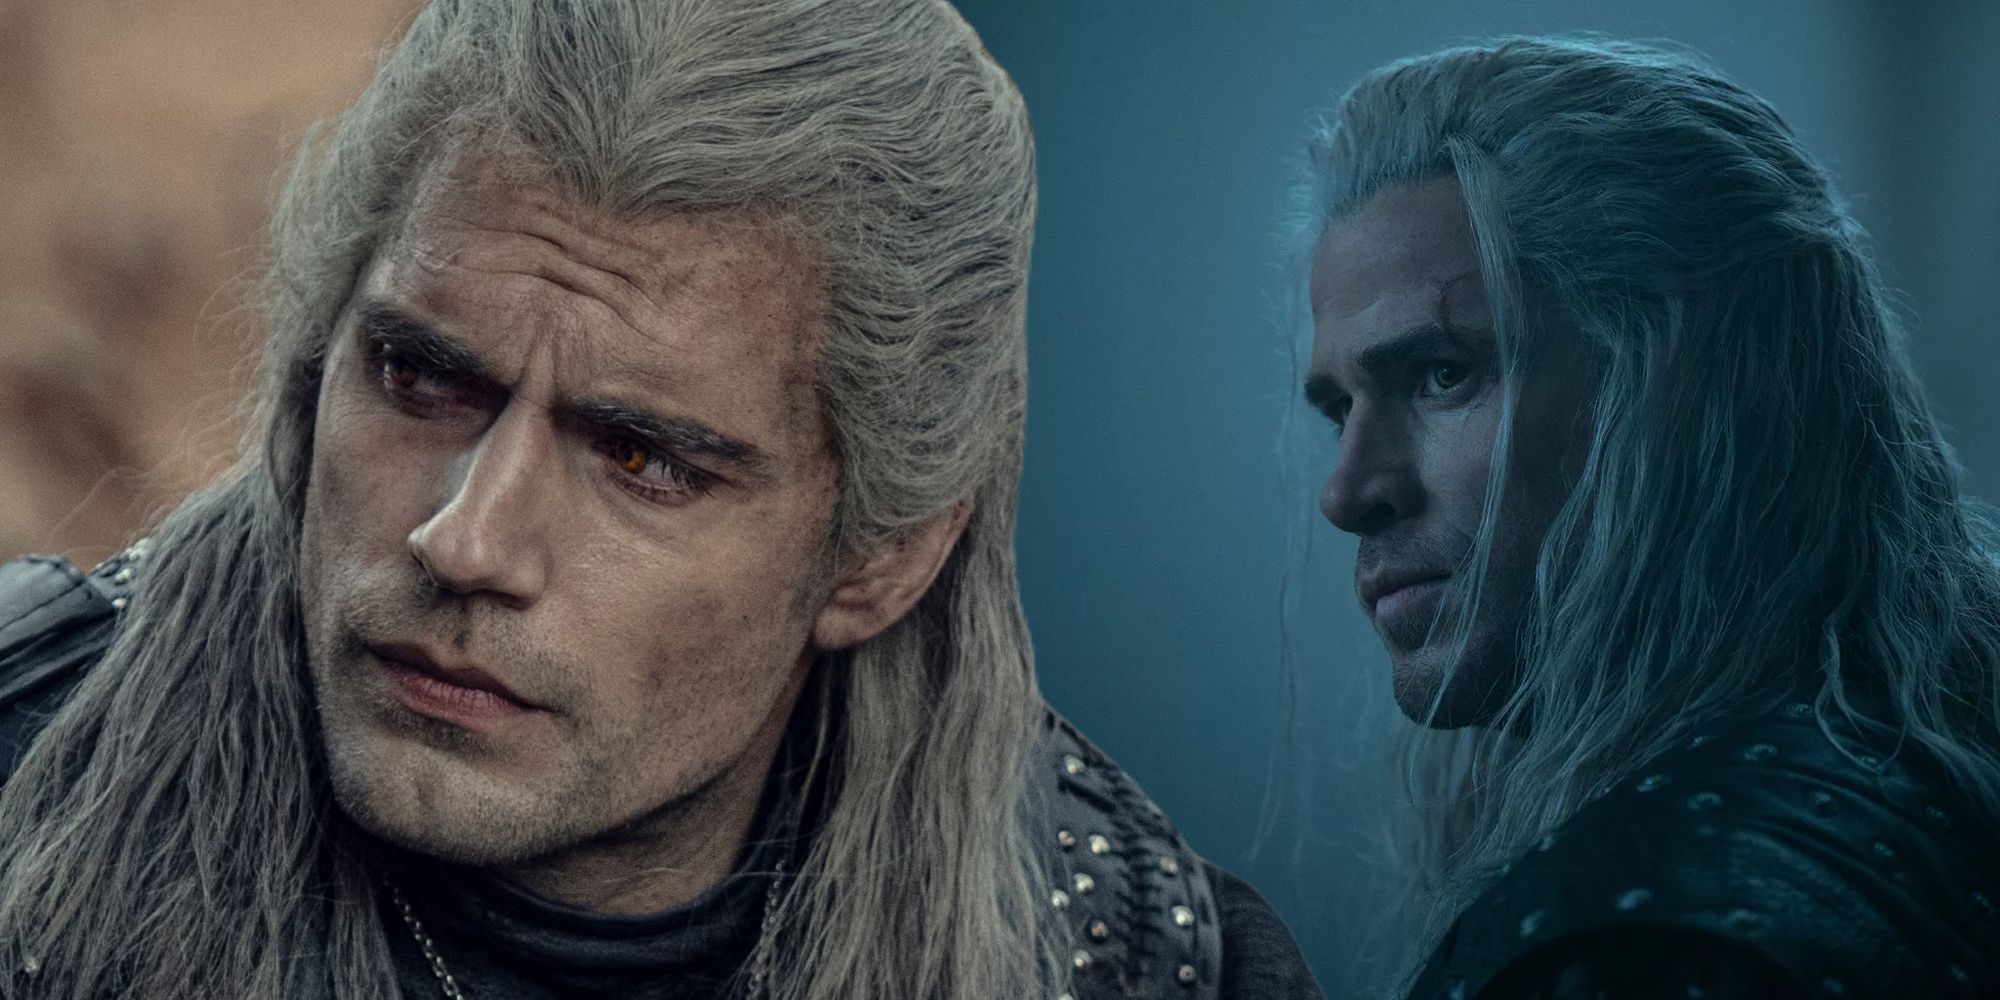 Henry Cavill and Liam Hemsworth as Geralt of Rivia in Netflix's The Witcher